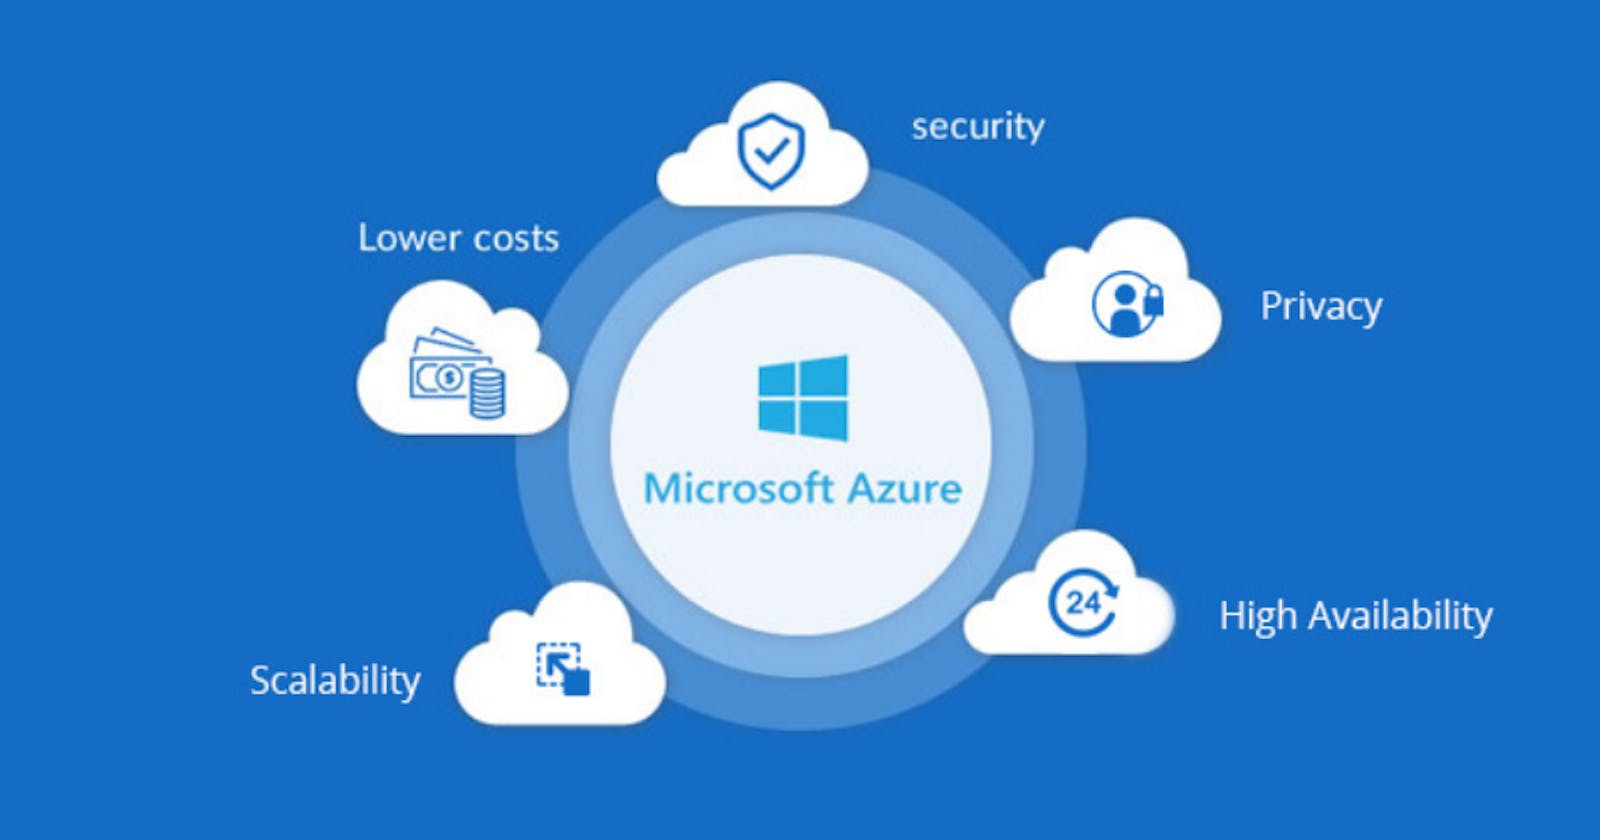 Announcing the Azure Migrate application and code assessment tool for .NET